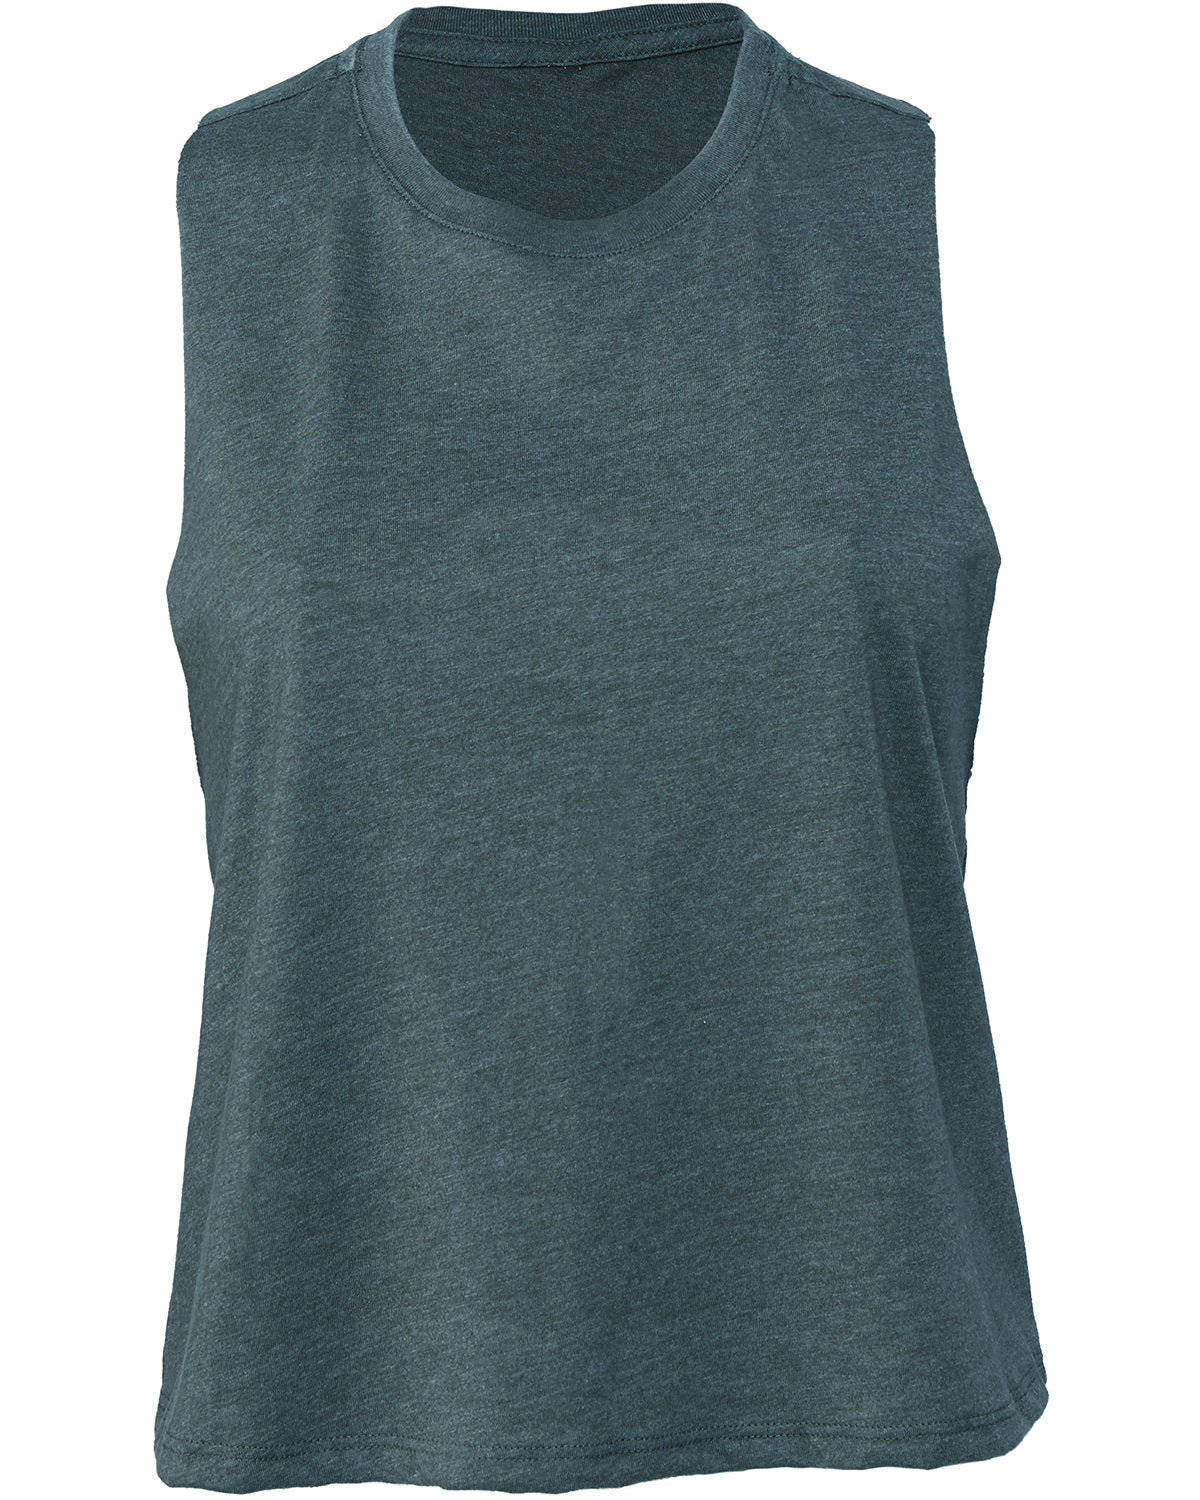 Deep teal heather; front view.